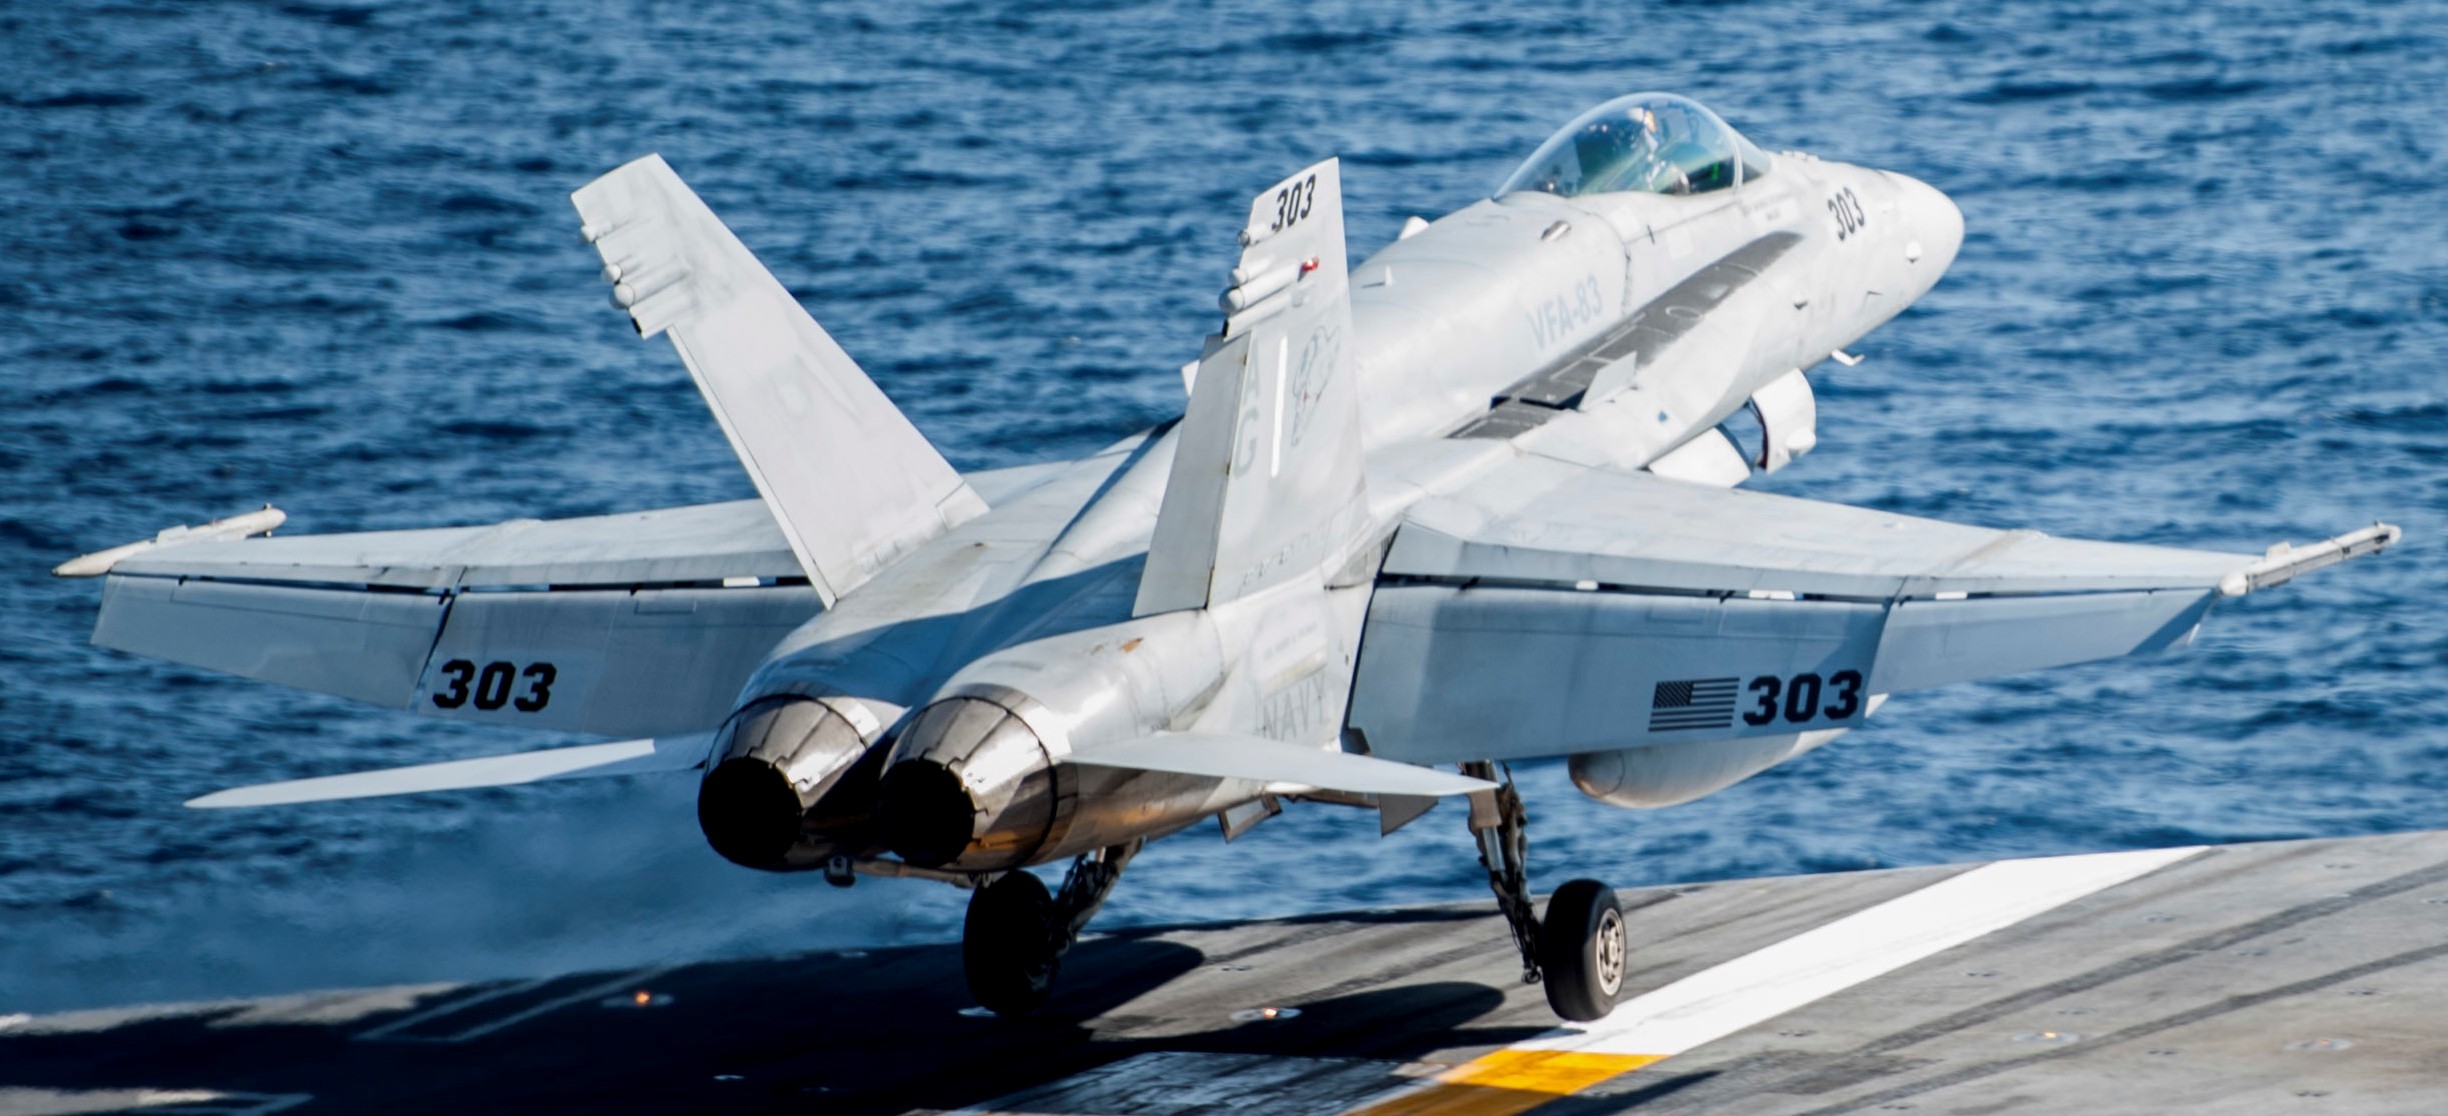 vfa-83 rampagers strike fighter squadron f/a-18c hornet cvw-7 uss harry s. truman cvn-75 64p